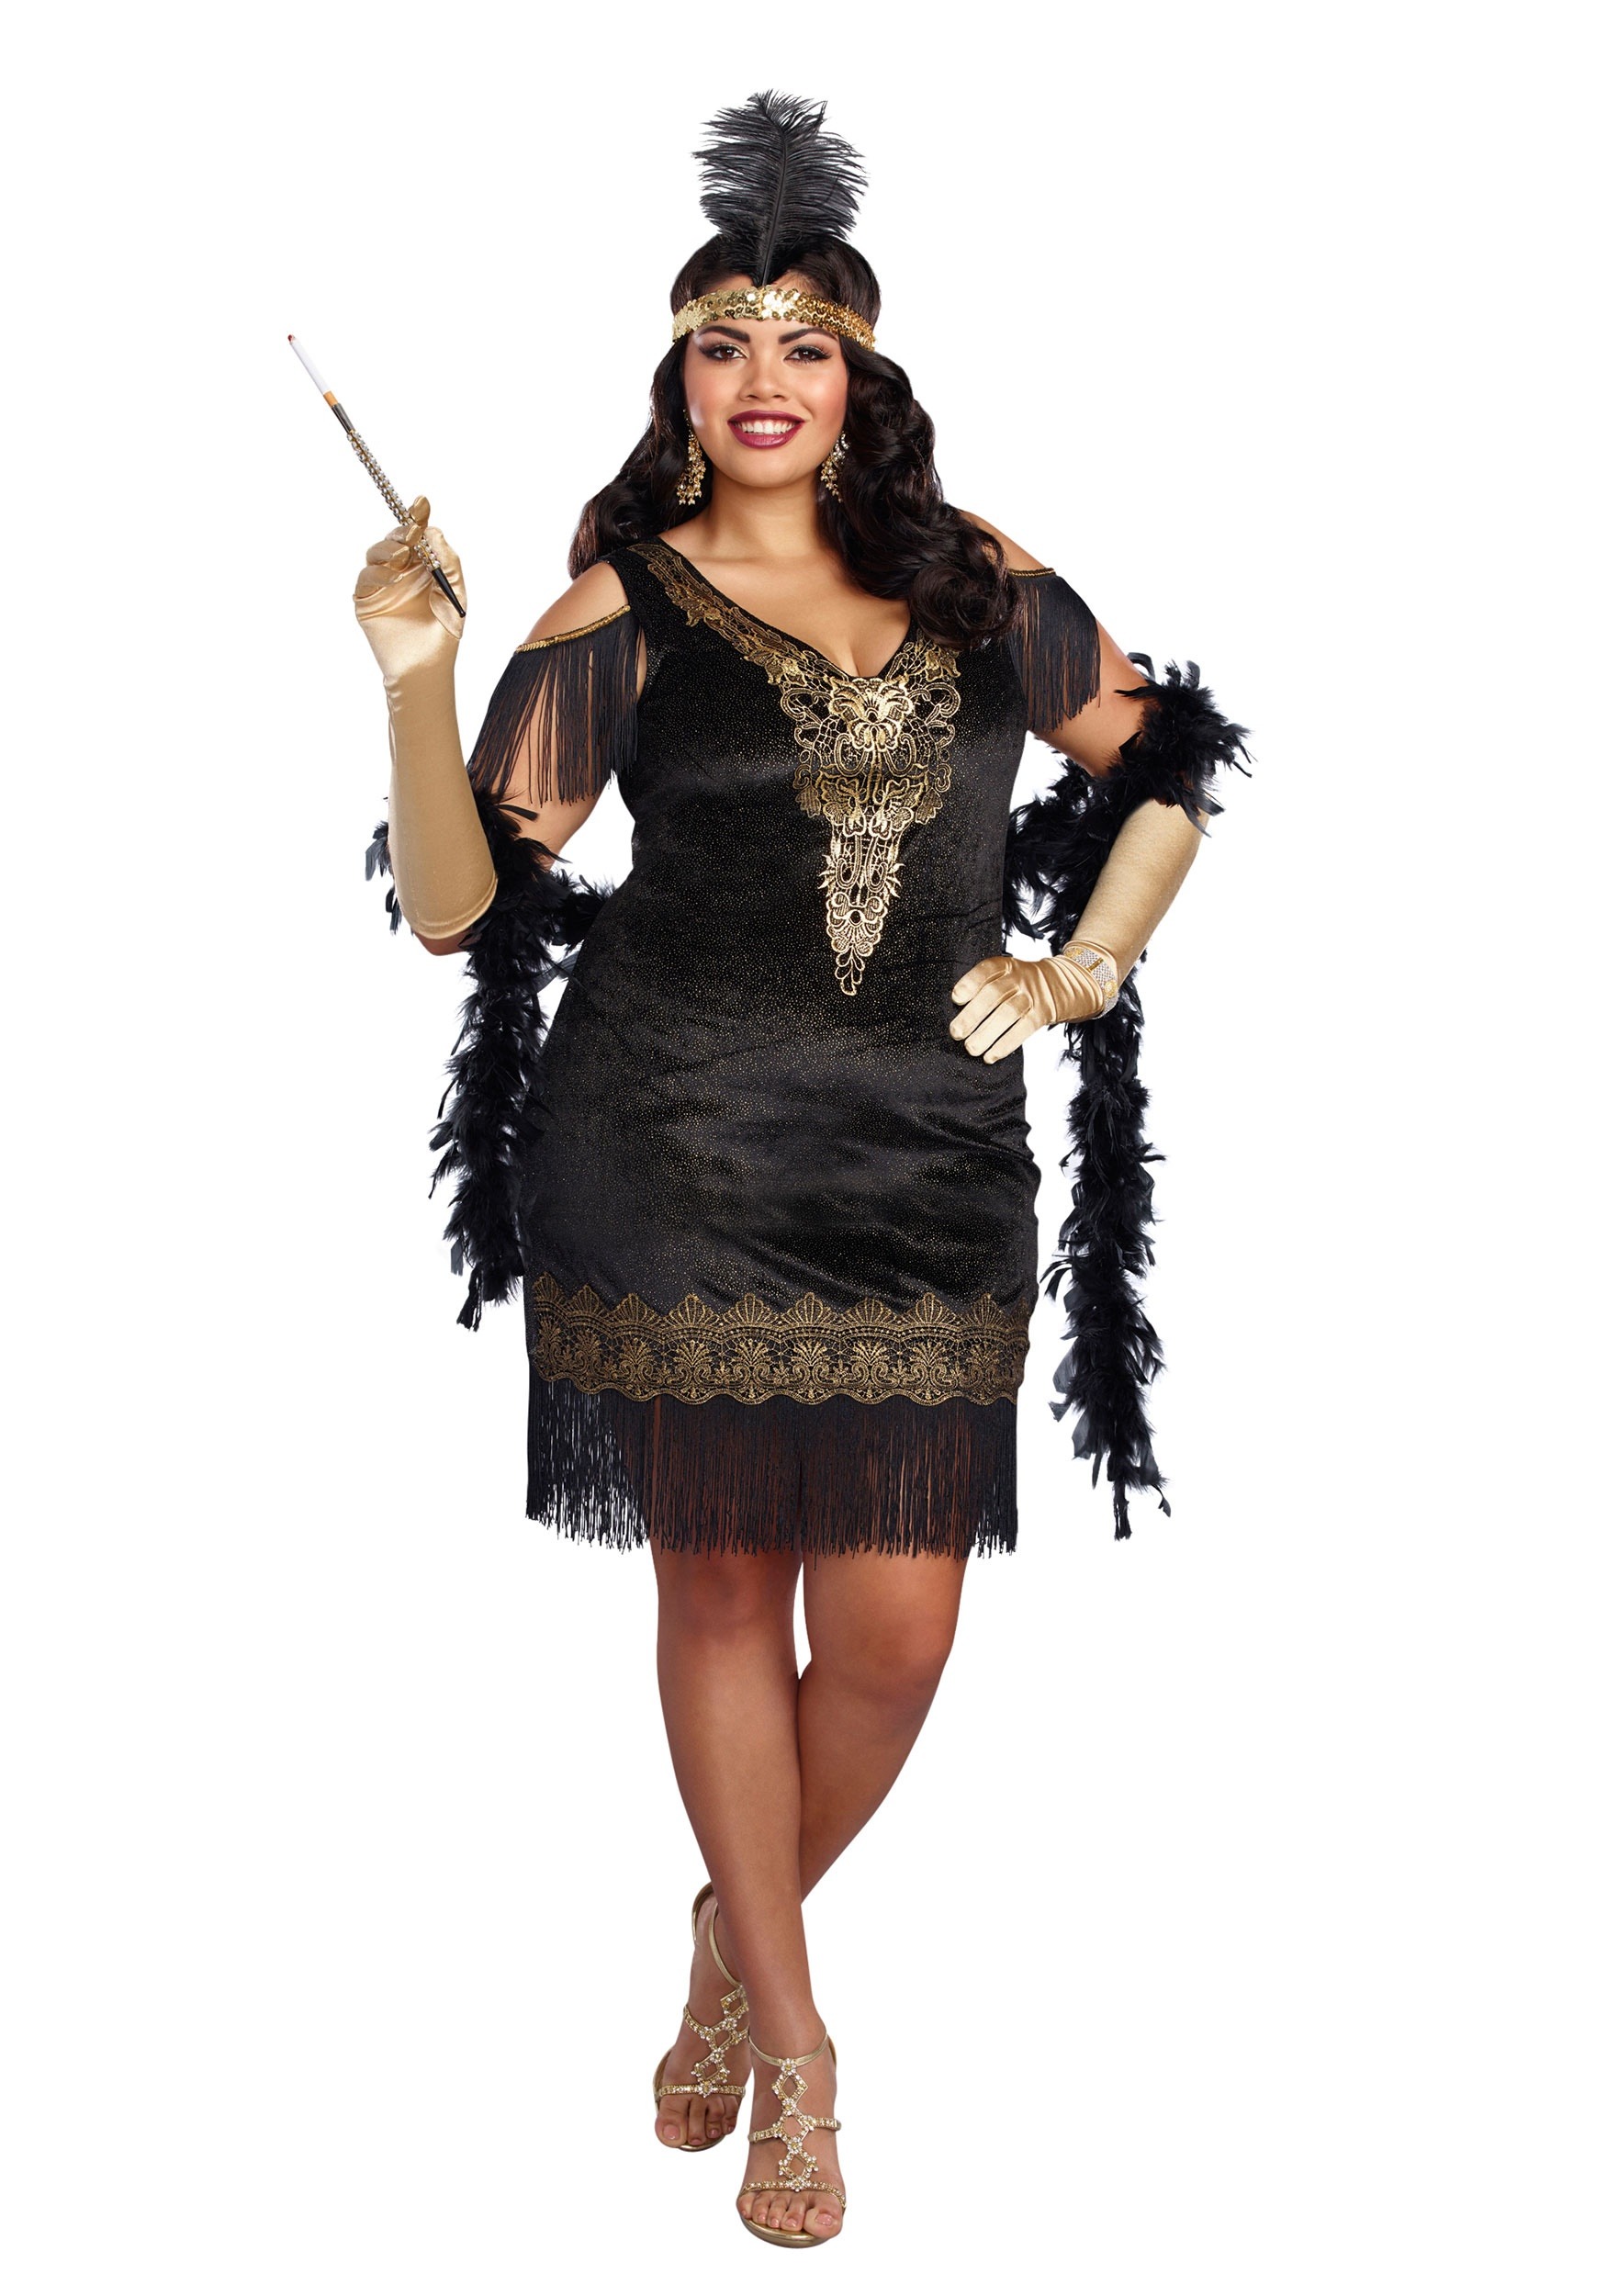 Women's Dolled Up Flapper Costume Dress